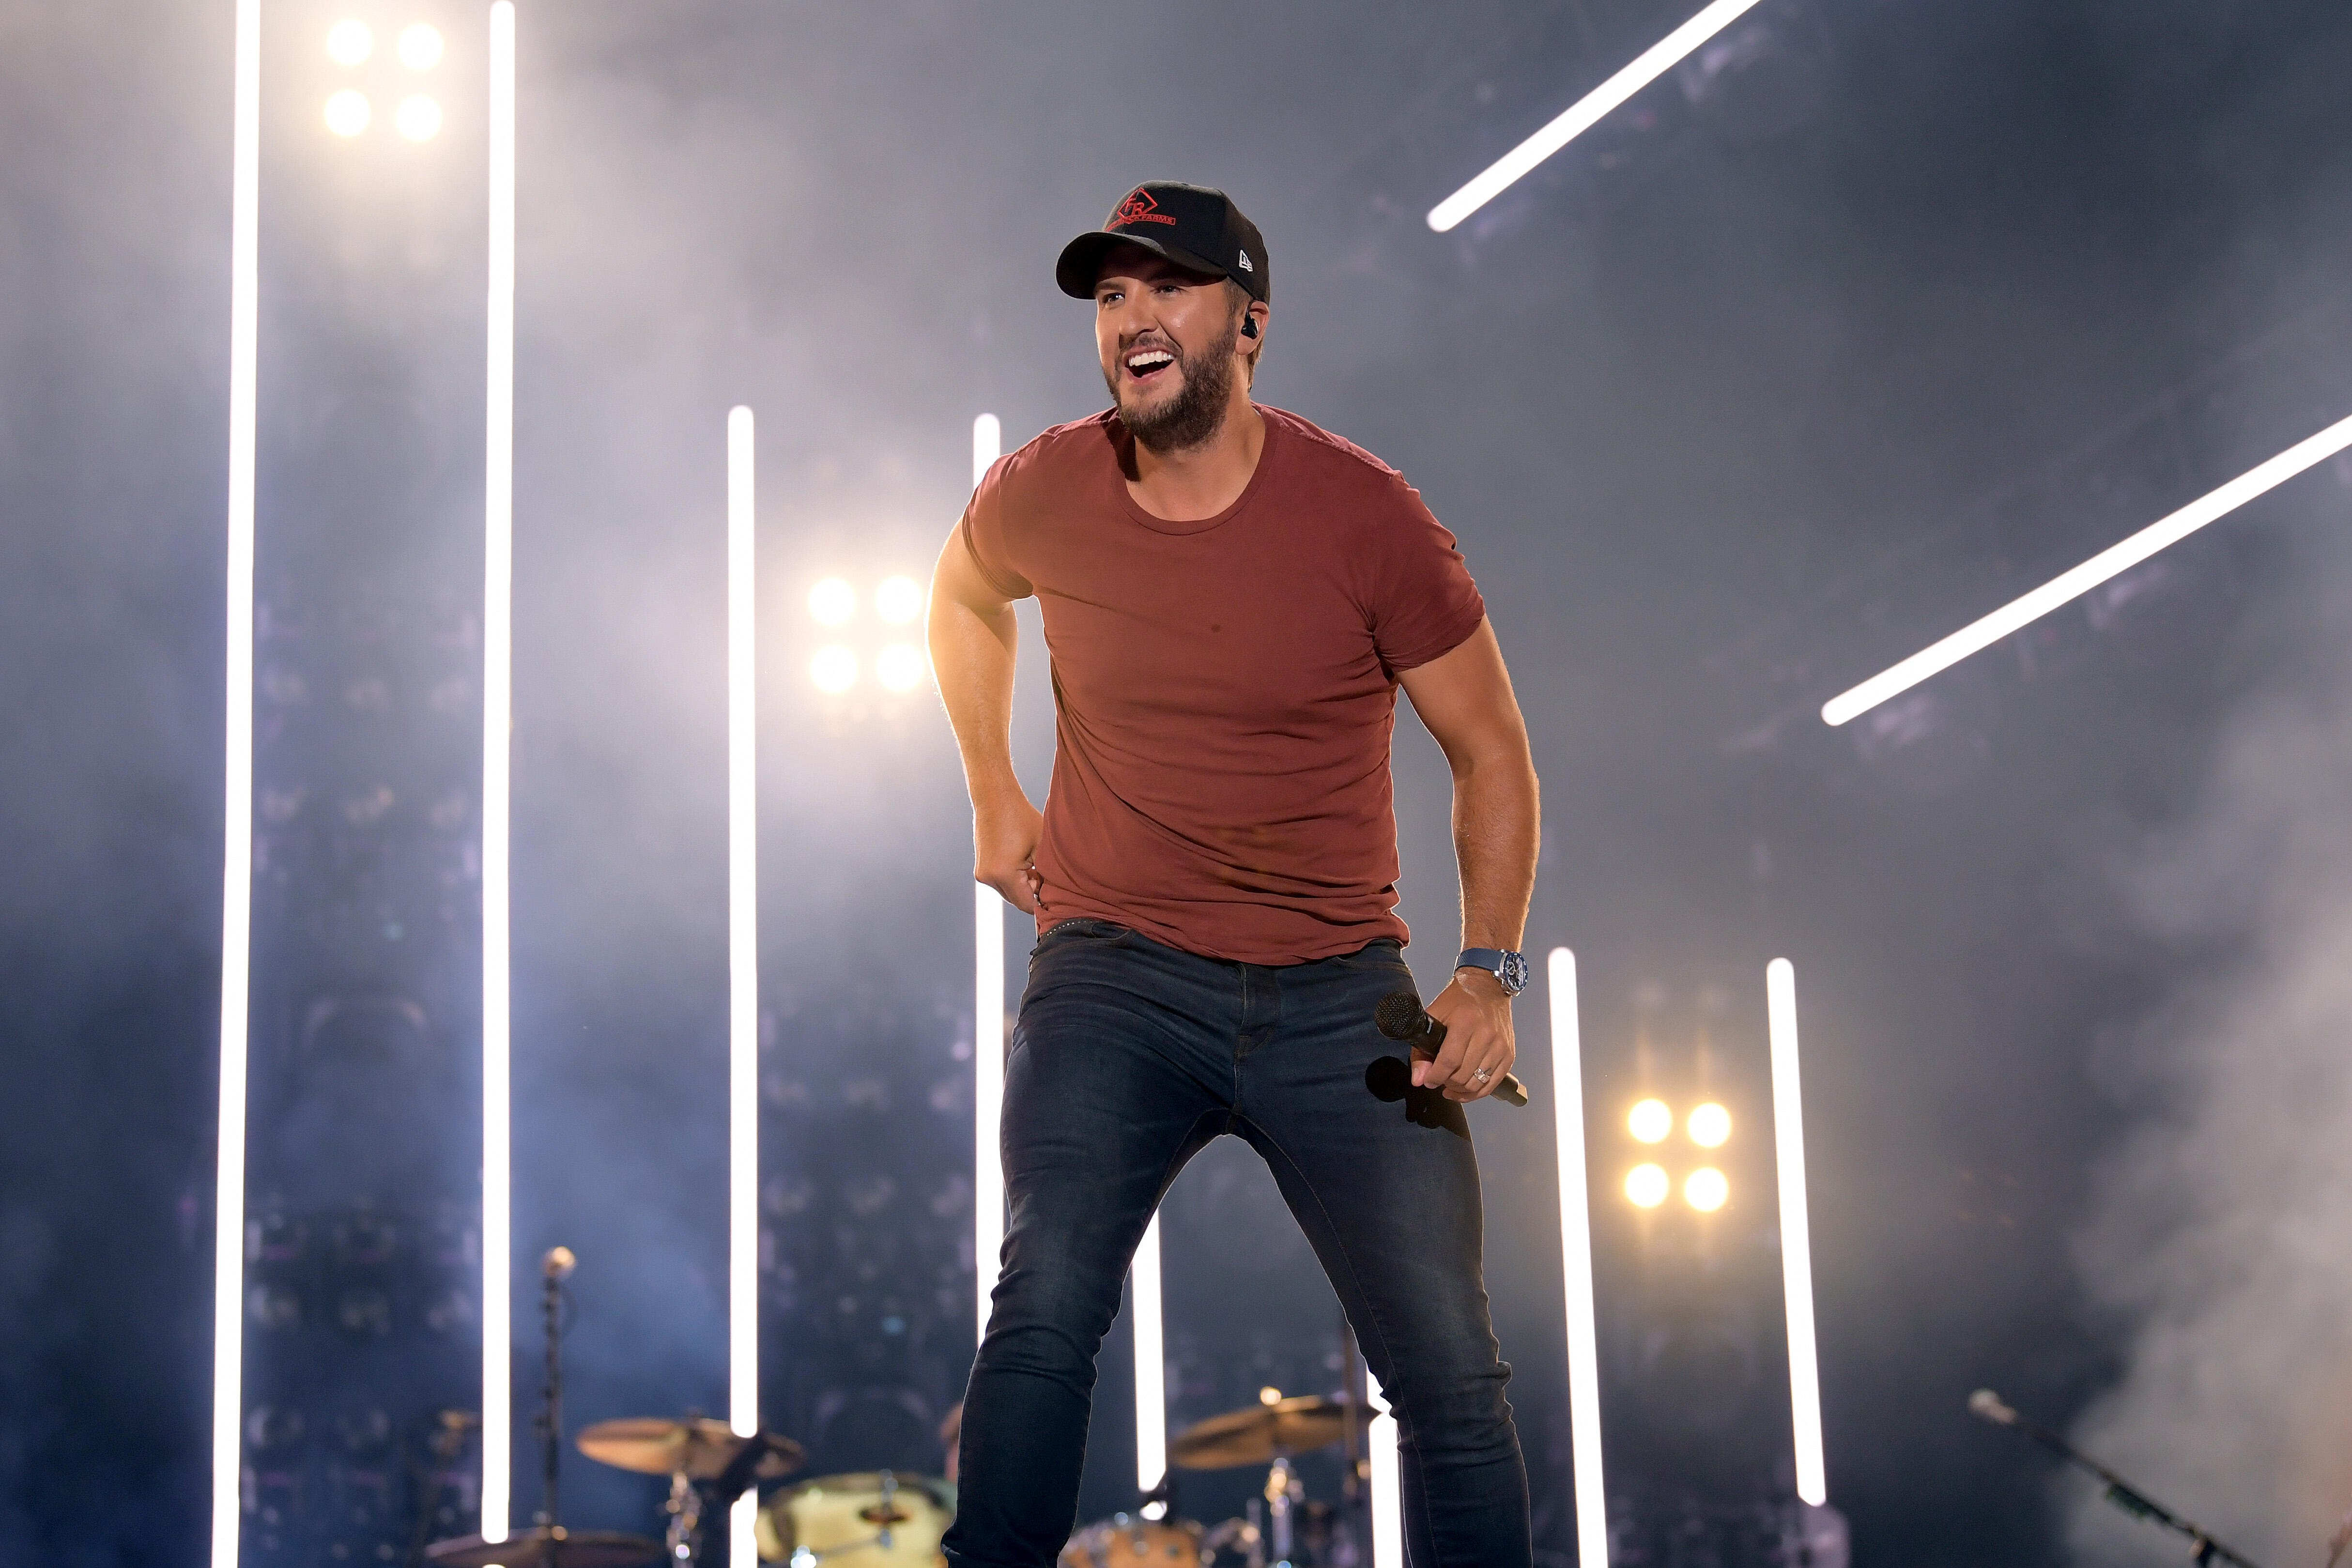 Watch Luke Bryan Dance In His Tour Bus To Celebrate His 45th Birthday